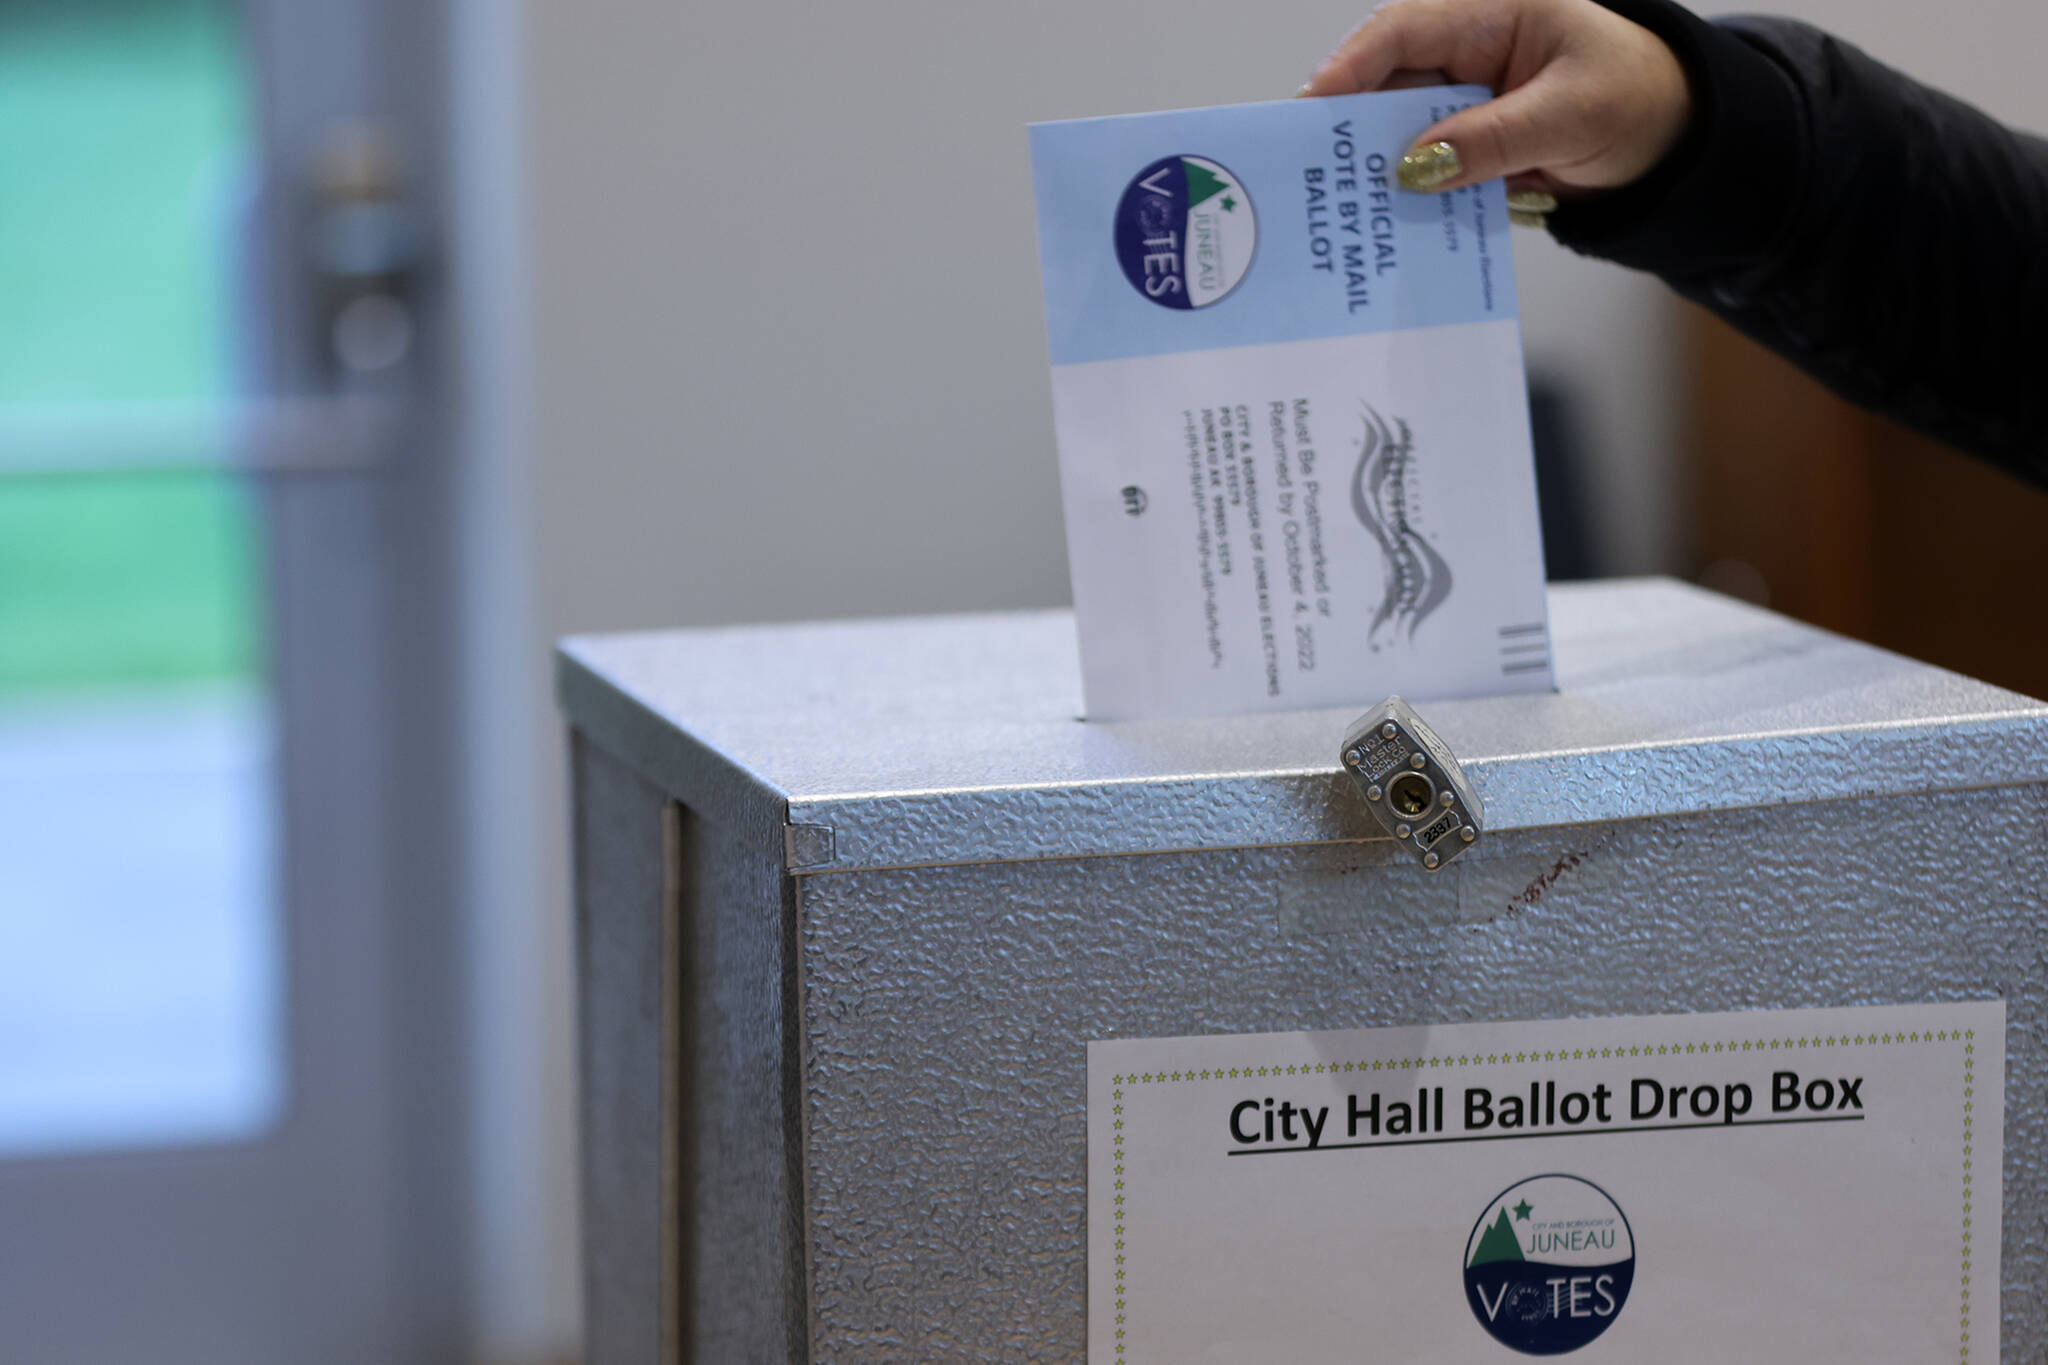 A ballot is placed in a drop box on Tuesday, Oct. 4, during the City and Borough of Juneau municipal election. Voters could cast ballots by mail. at voting centers located at City Hall and the Mendenhall Valley Public Library or at secure drop boxes at Don D. Statter Harbor and at the Douglas Public Library/ Fire Station. (Ben Hohenstatt / Juneau Empire File)